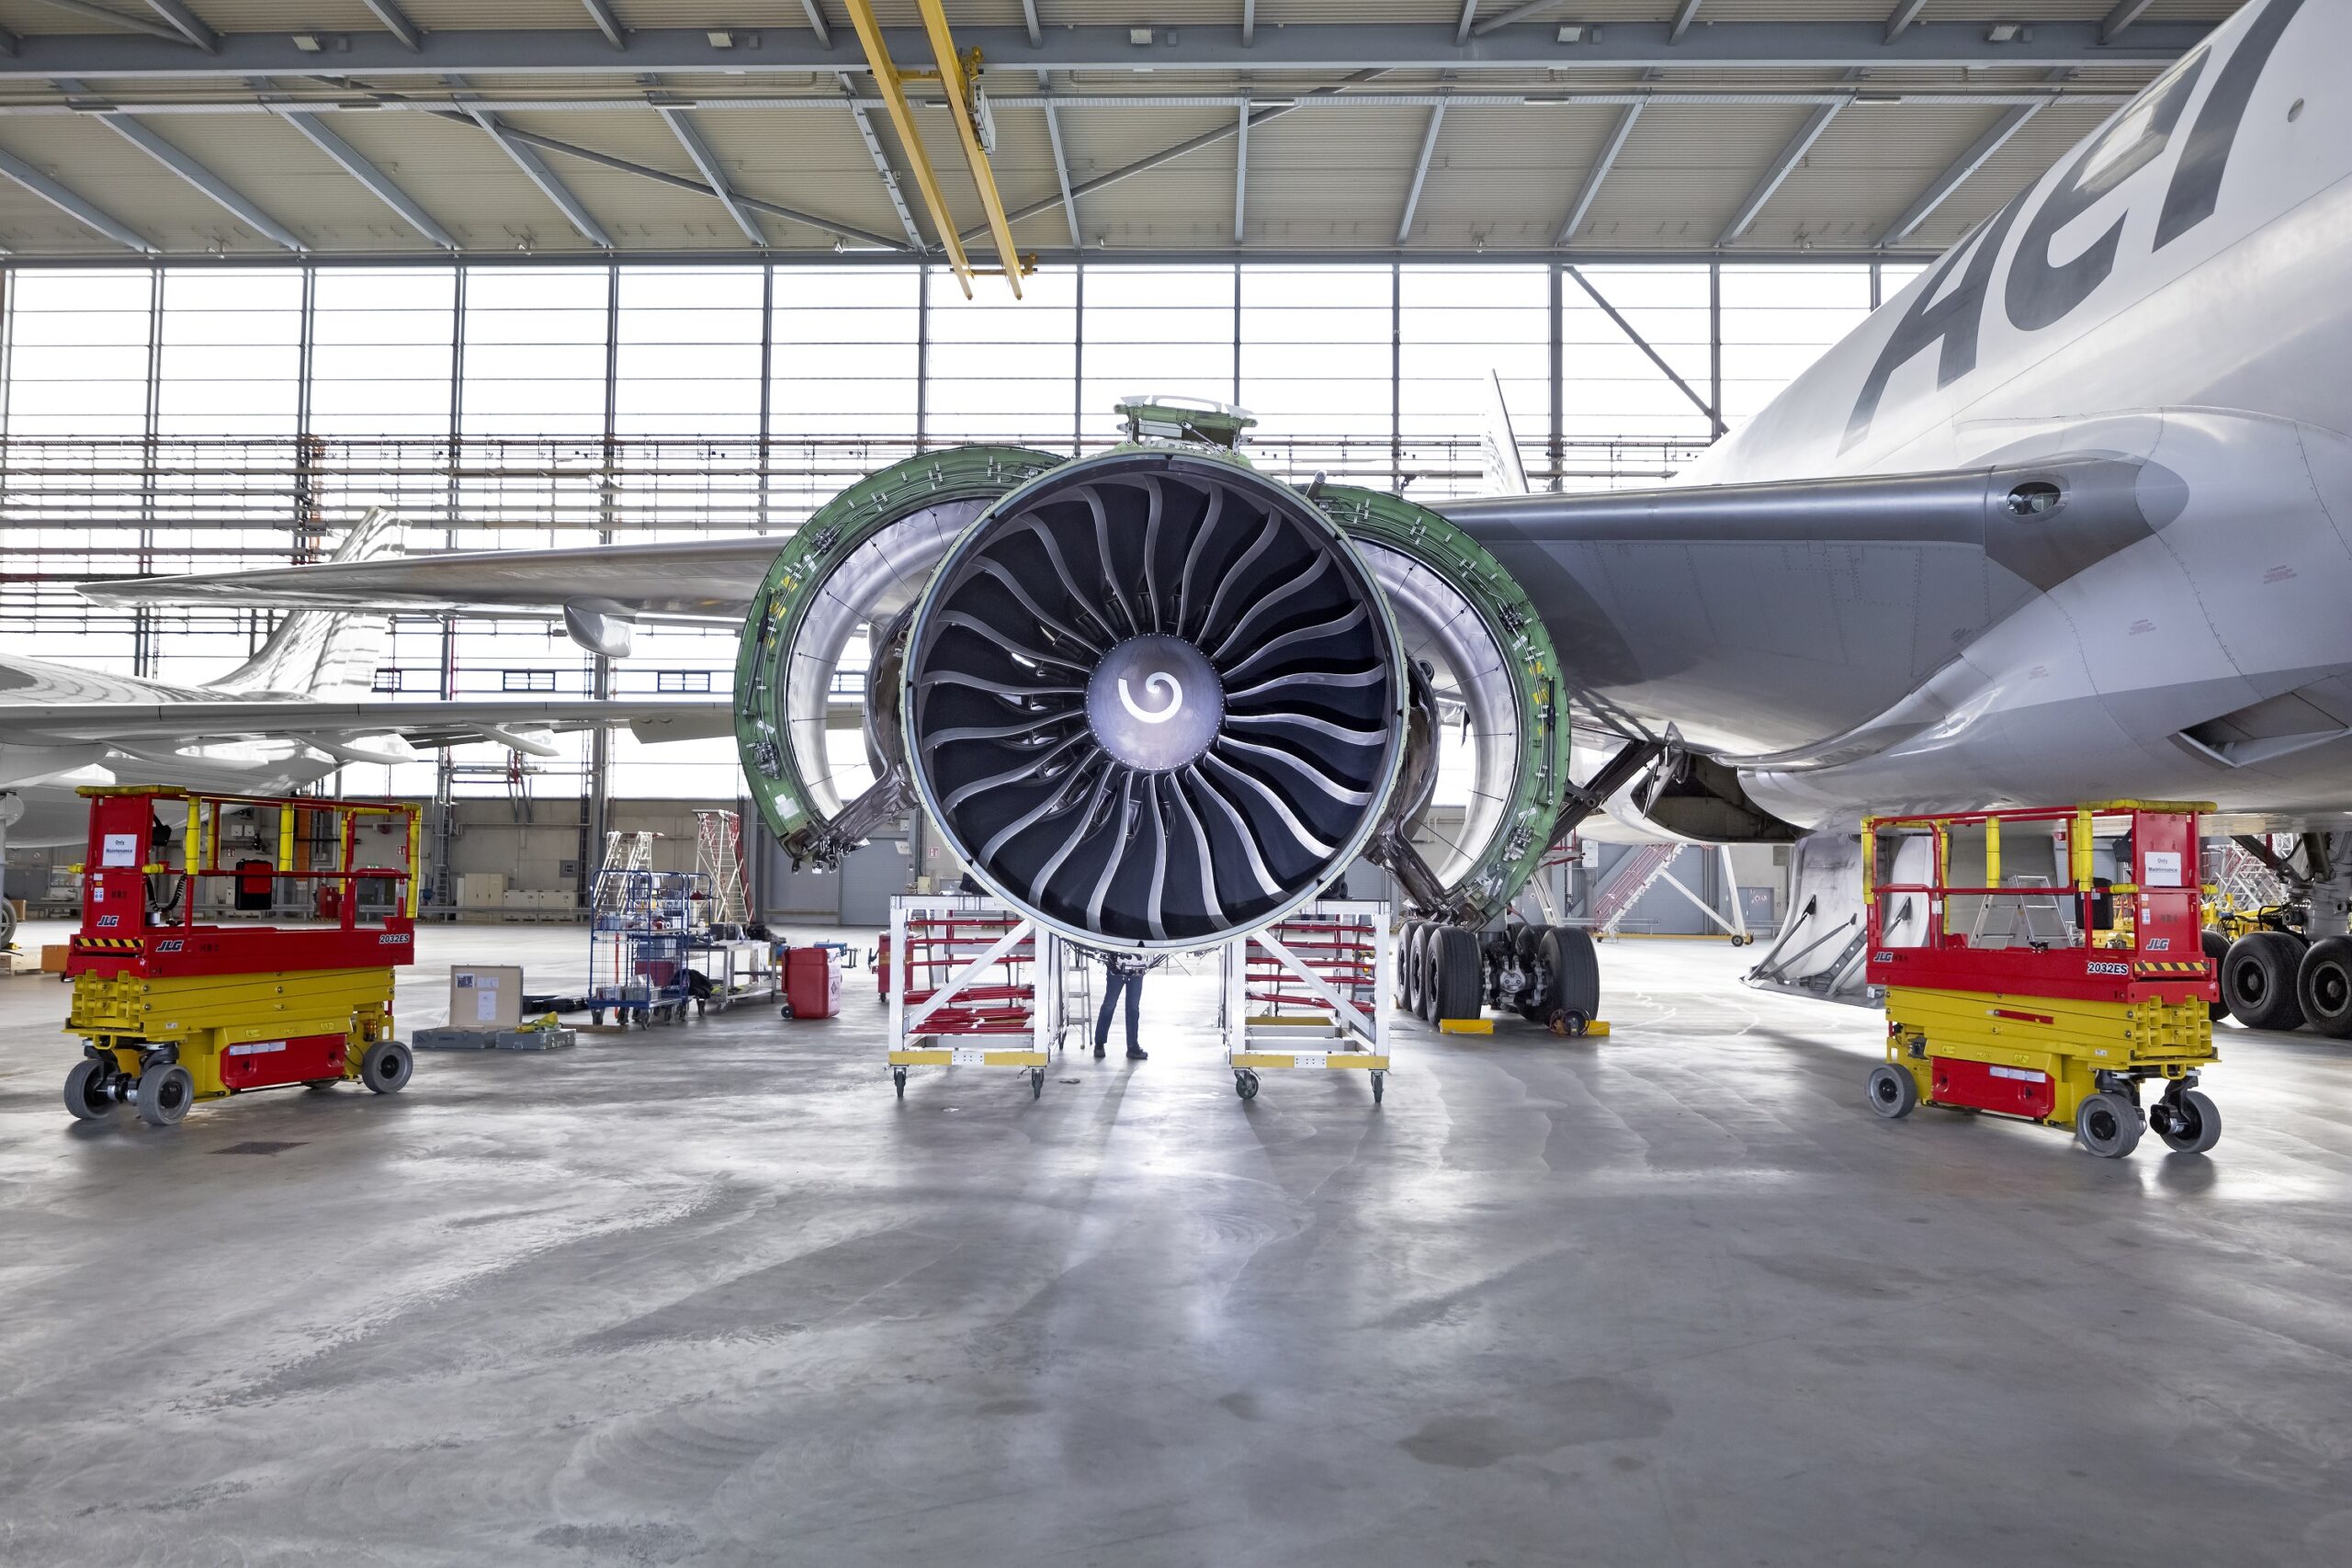 MTU Maintenance and Aerologic extend exclusive GE90-110B contract